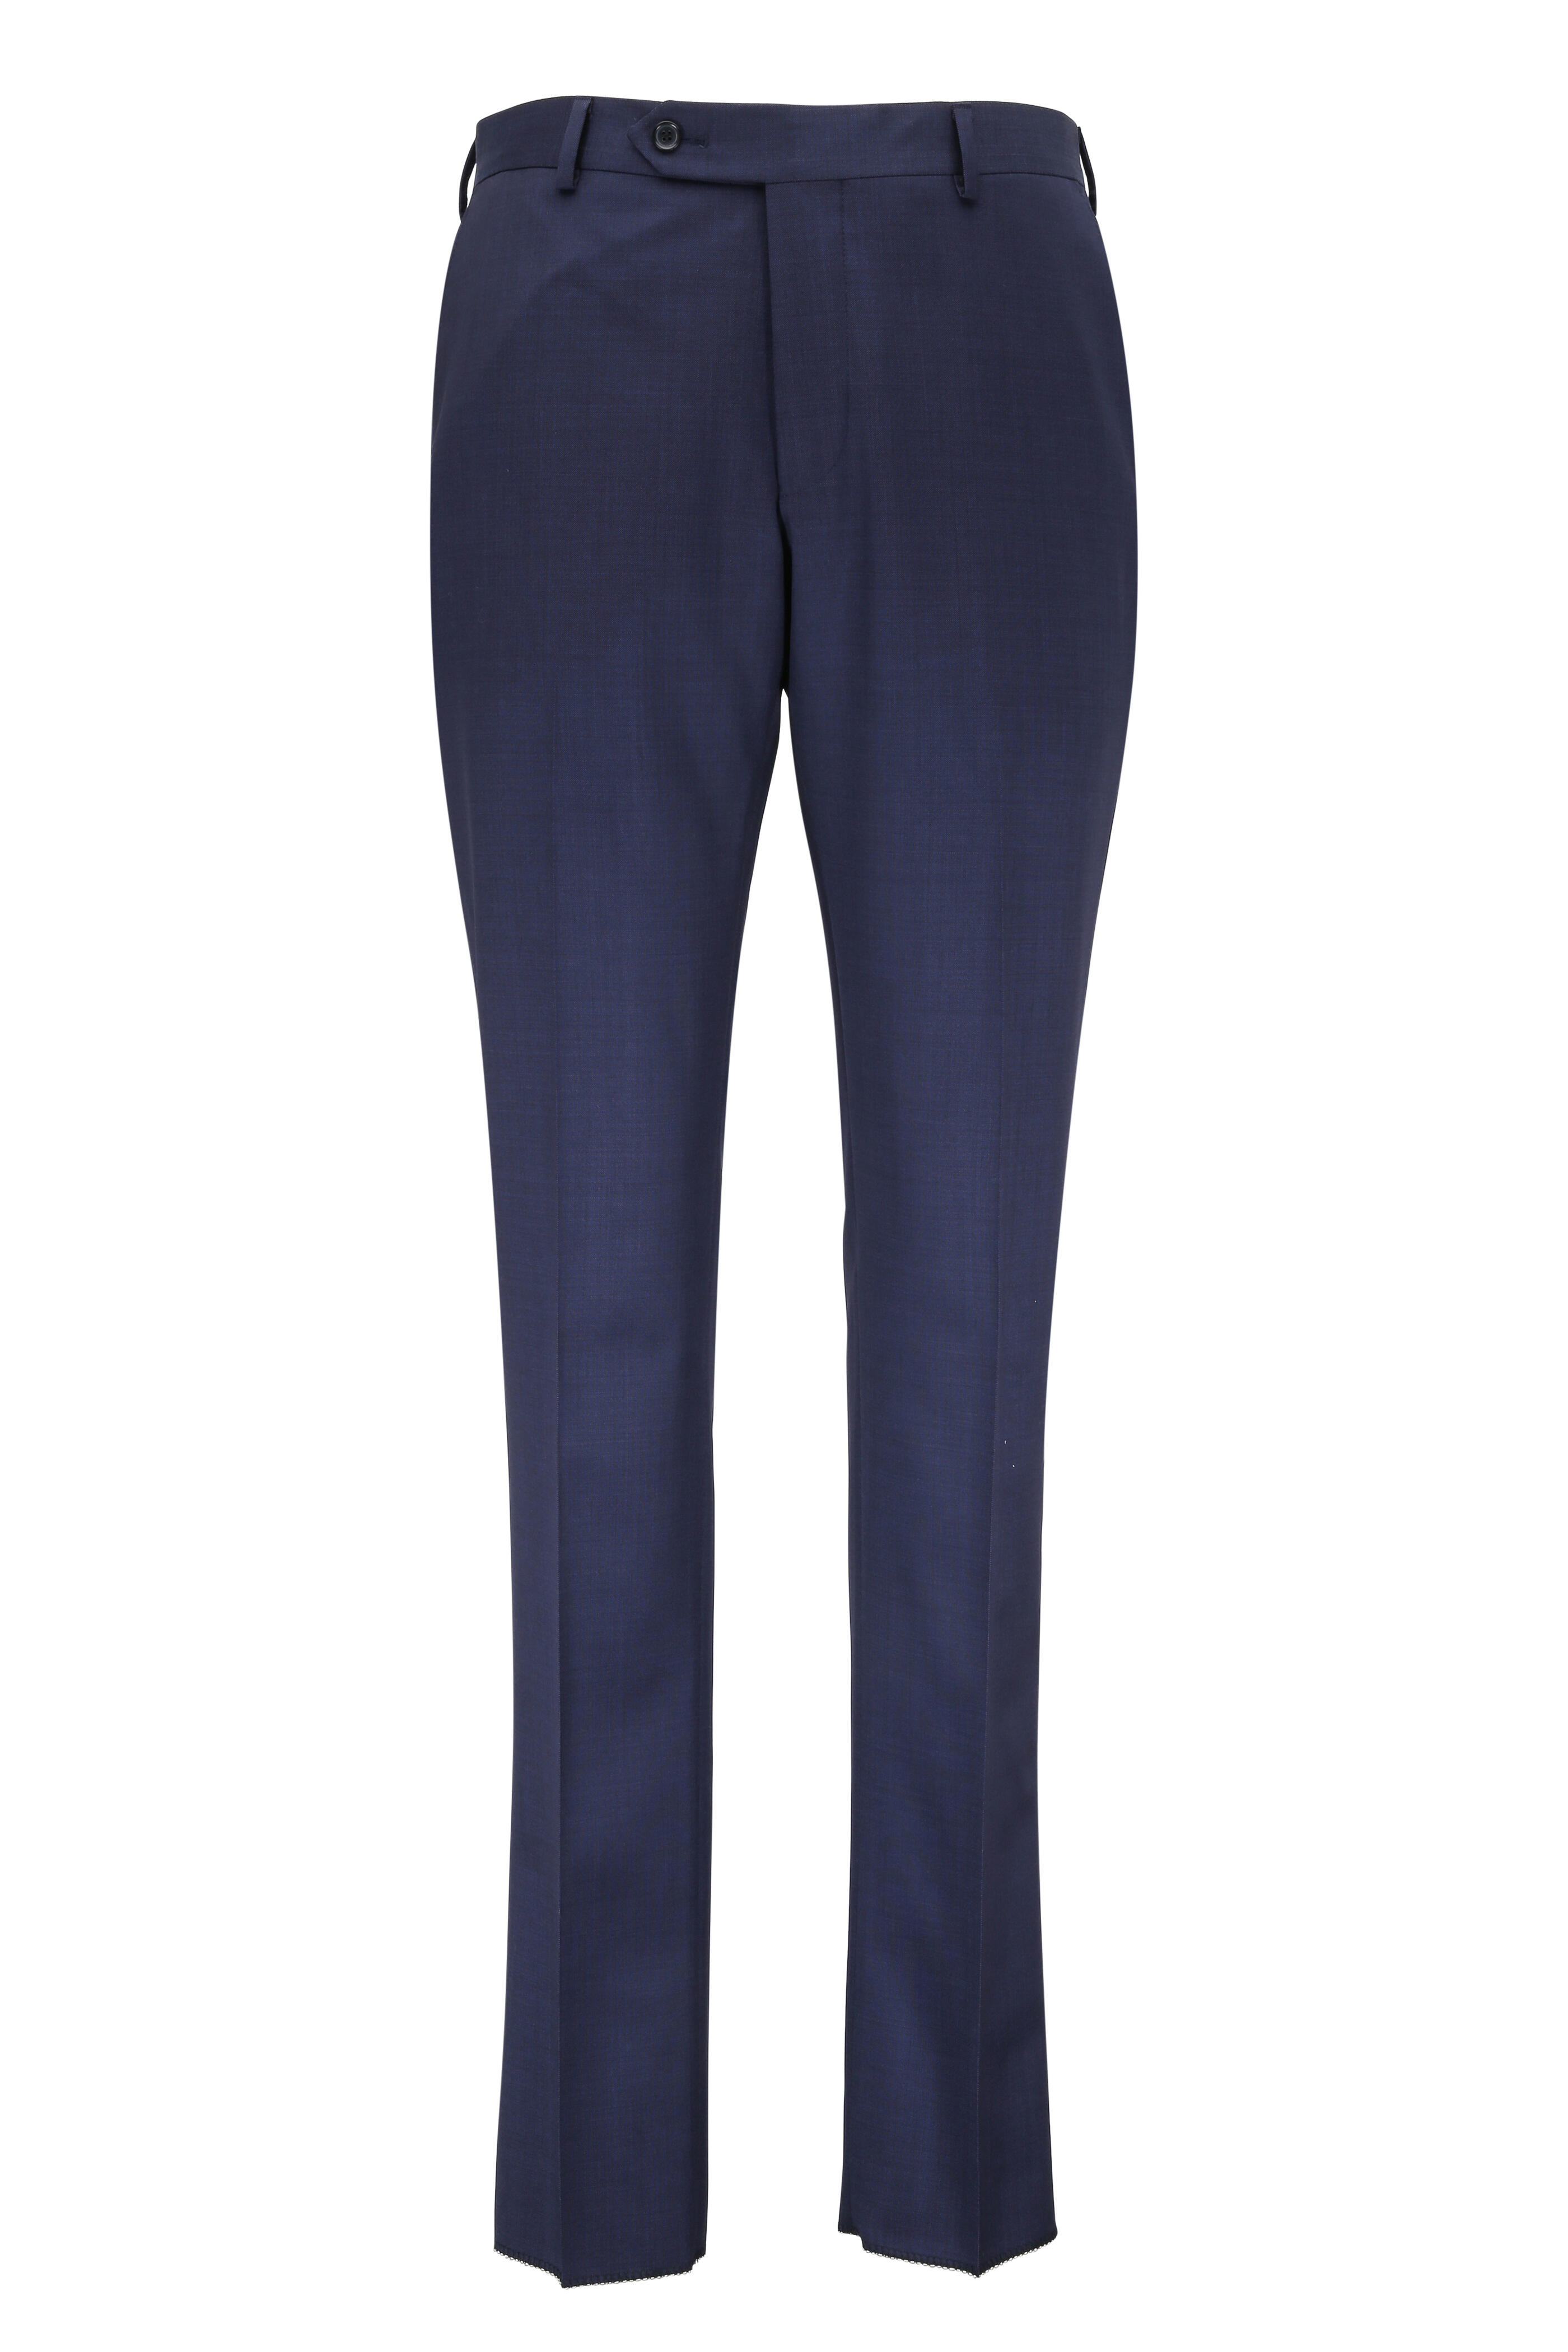 Samuelsohn - Solid Navy Blue Wool Suit | Mitchell Stores